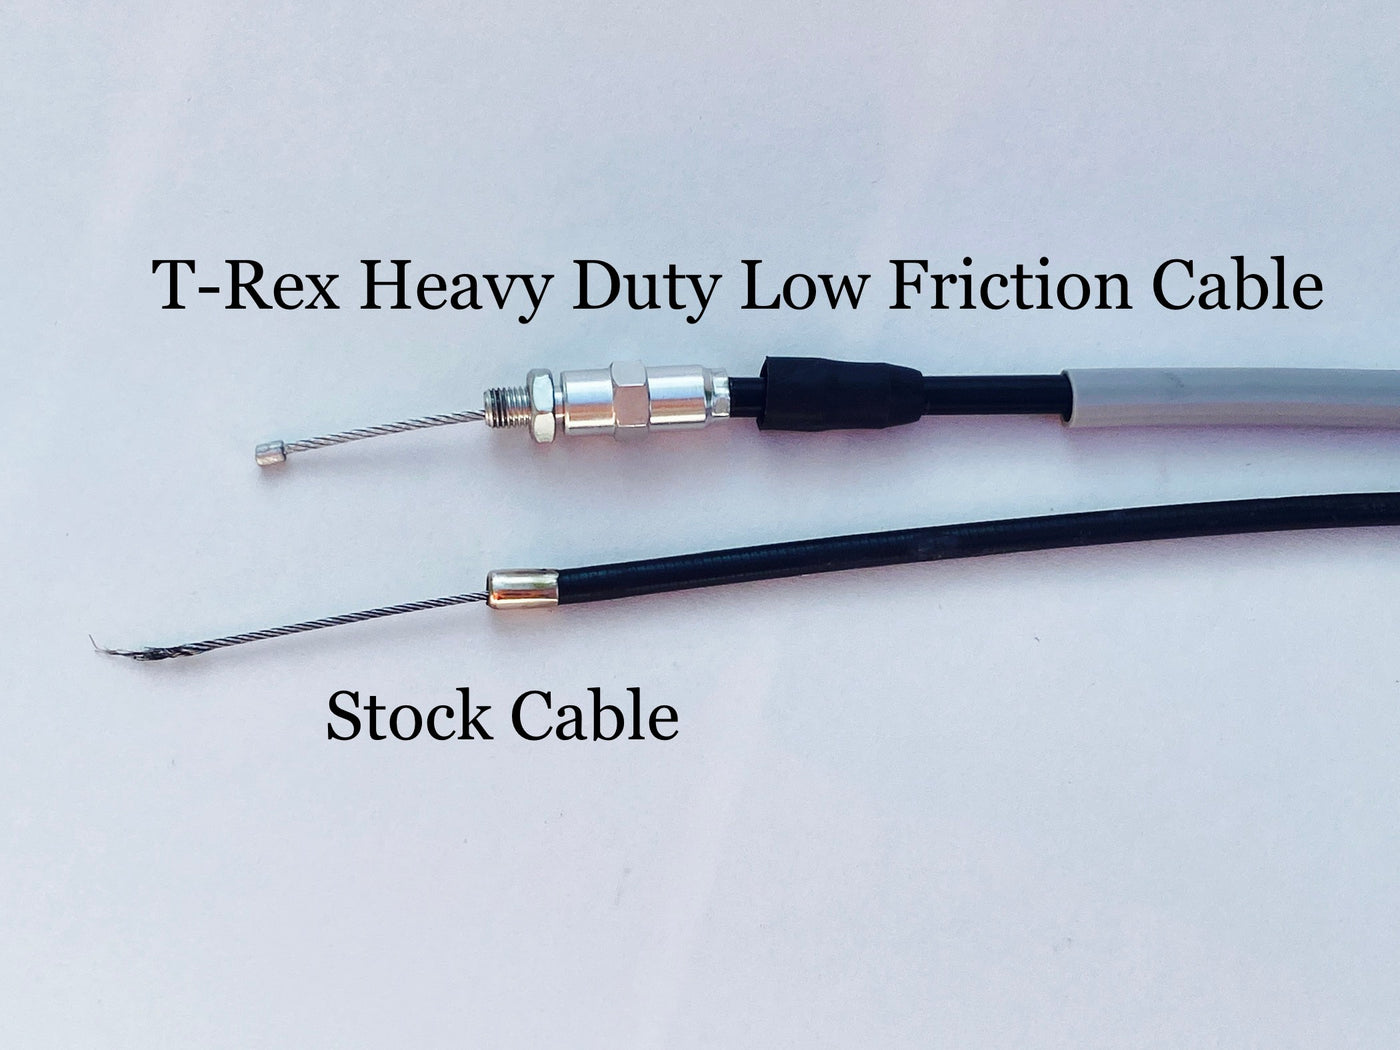 T-Rex Low Friction Heavy Duty Cables